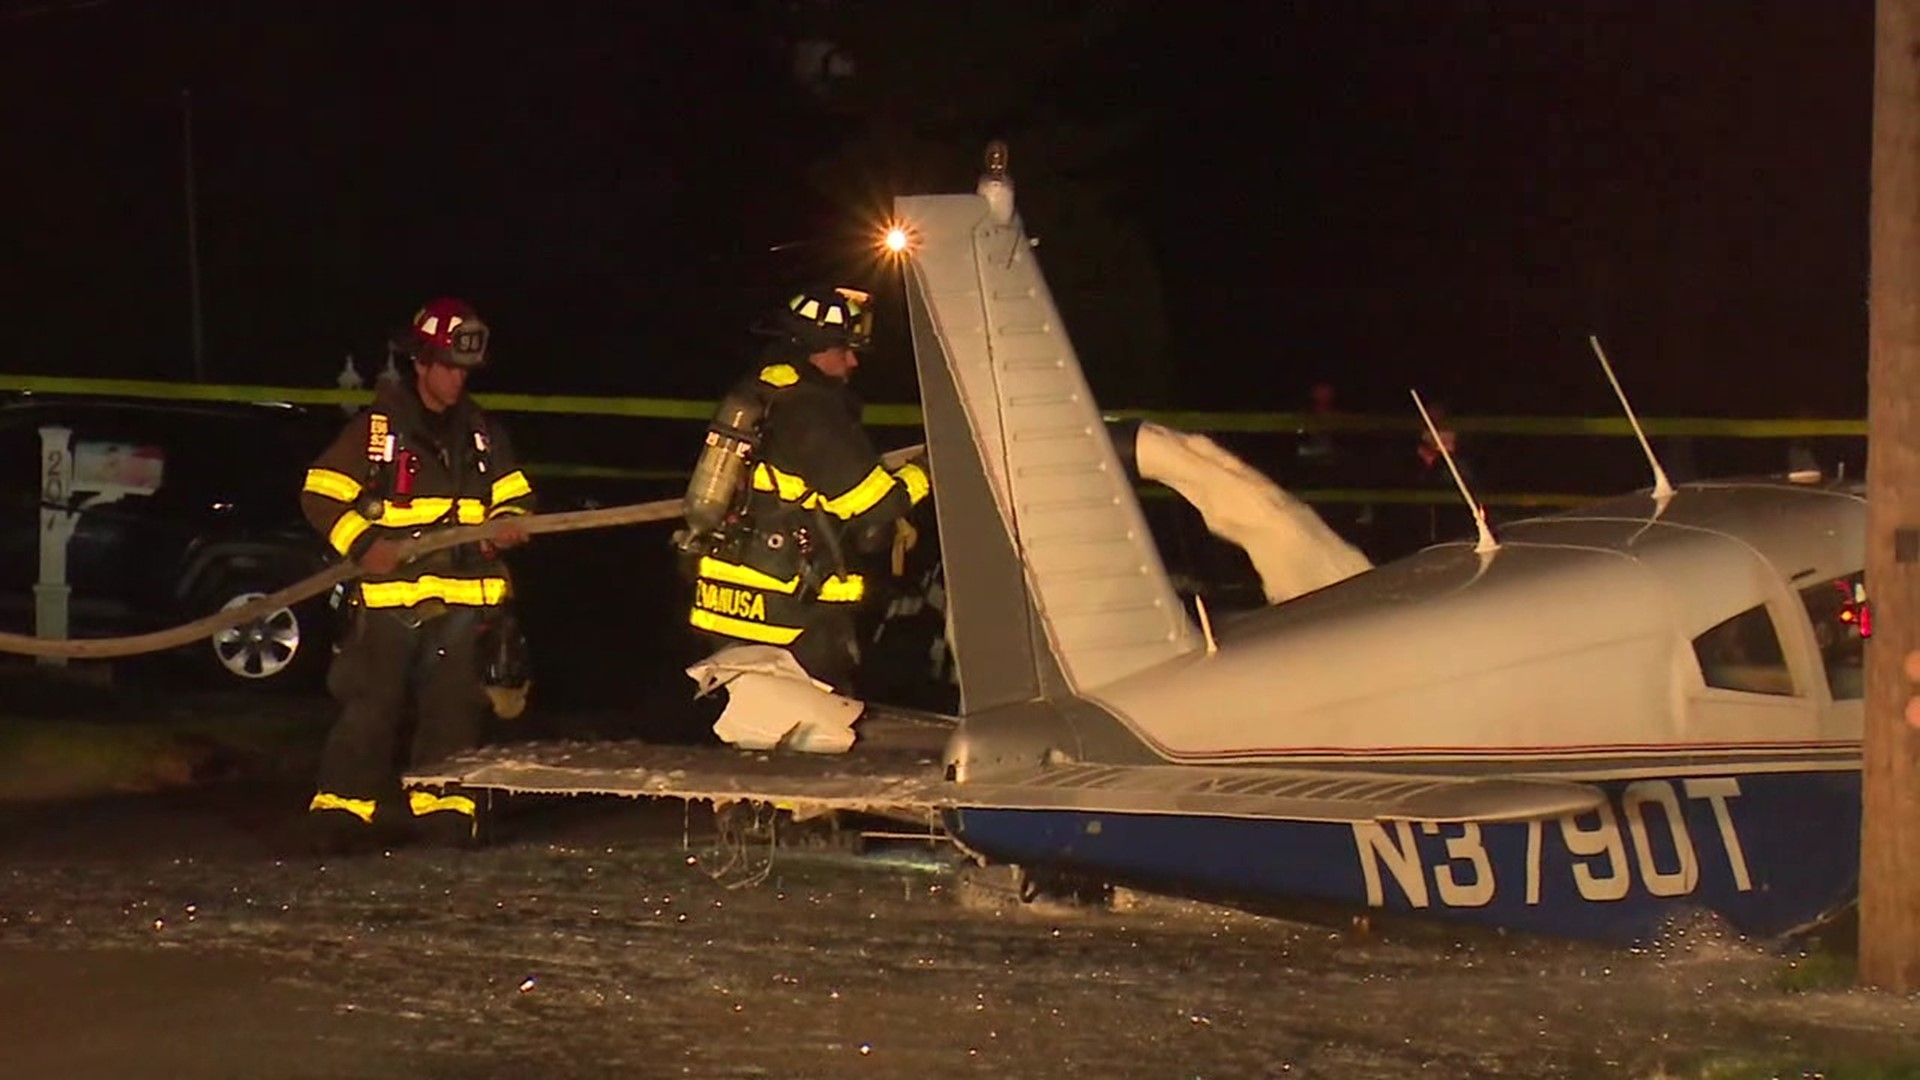 A small-engine aircraft went down on Stone Street in Moosic Sunday night. The two people on board survived. Now, the FAA is investigating.